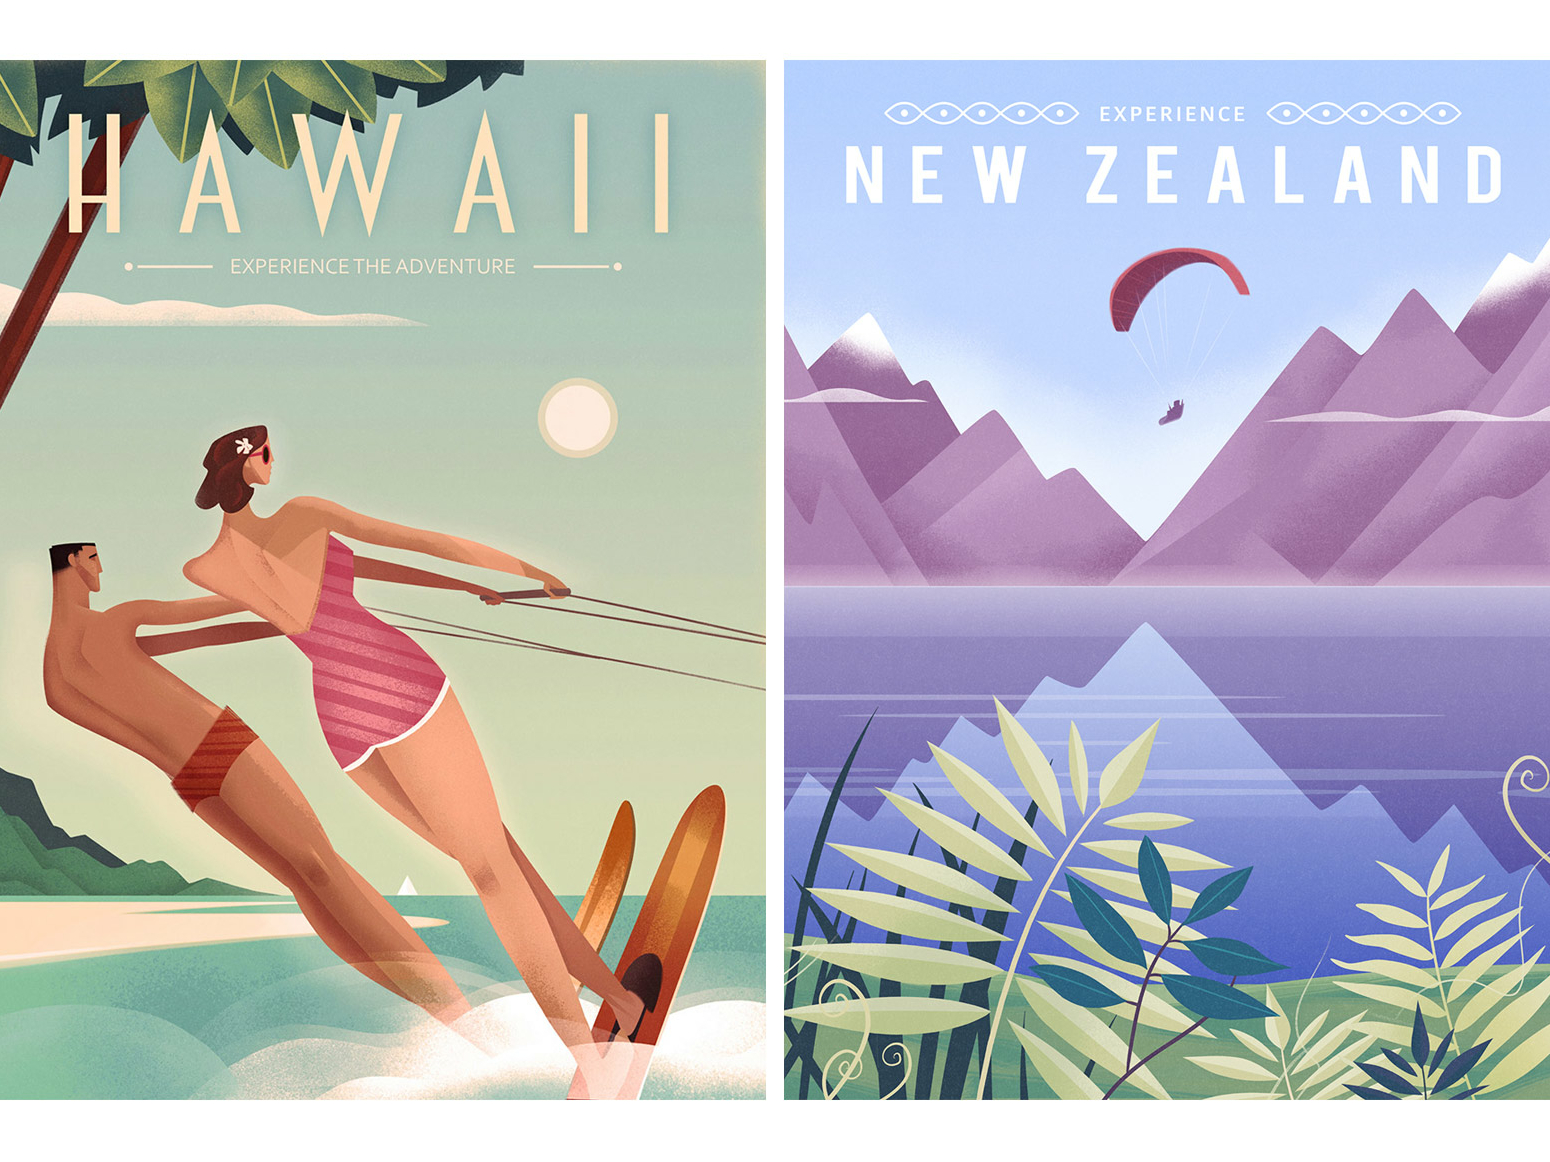 Retro graphic travel posters by Martin Wickstrom on Dribbble